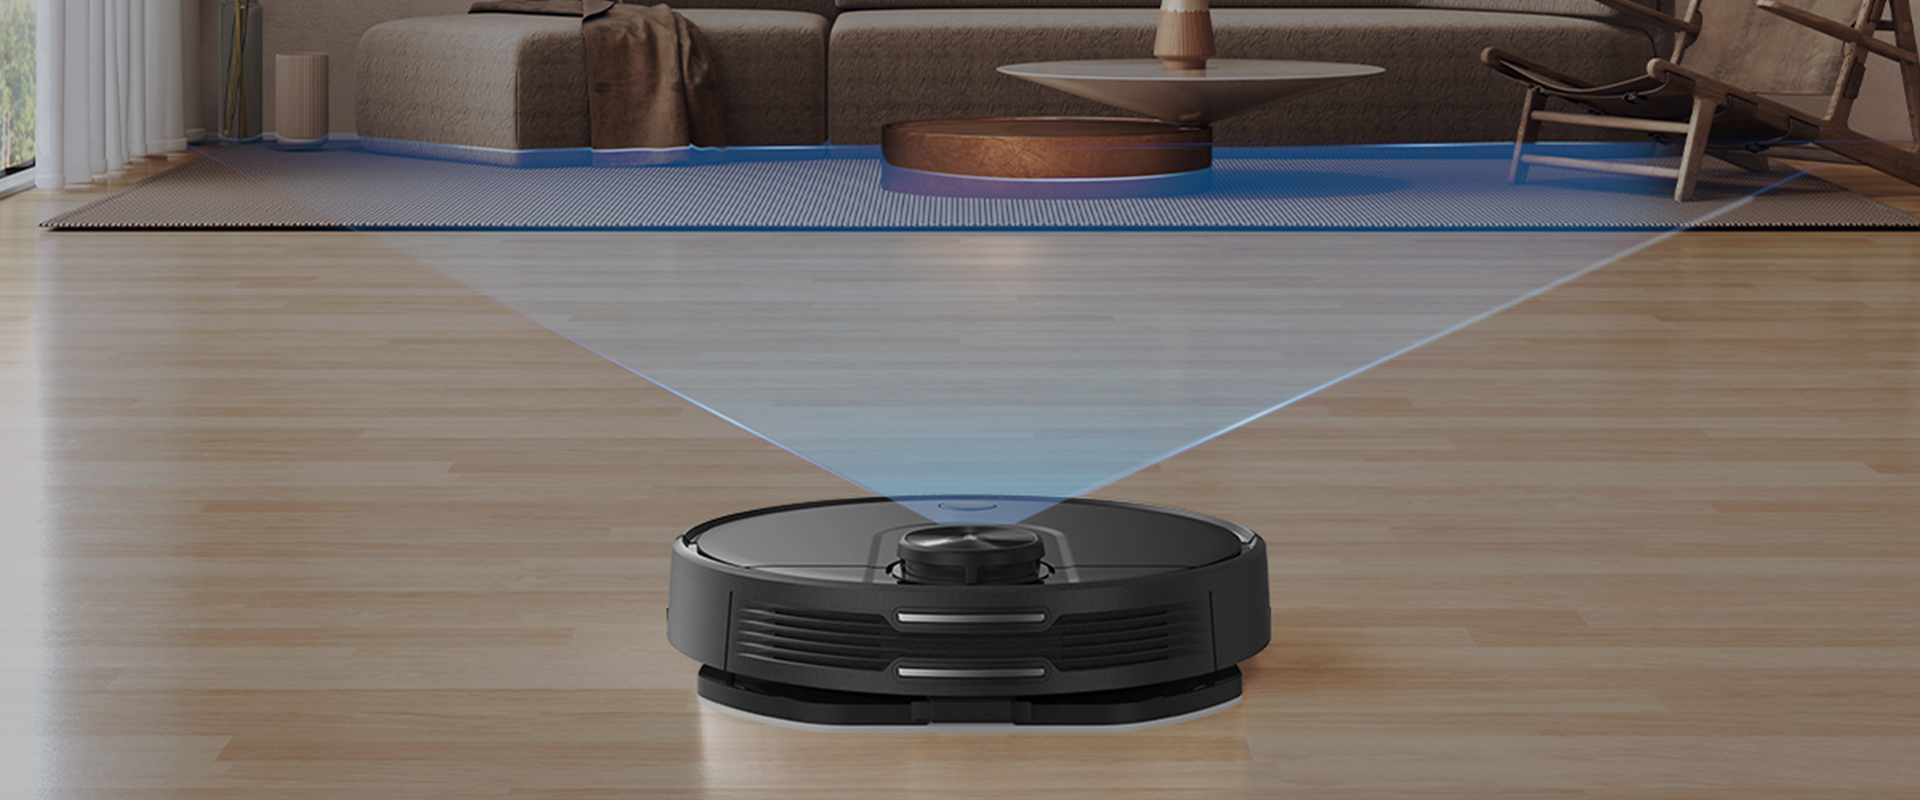 Viomi V2 Max house cleaning robot with LDS laser navigation system